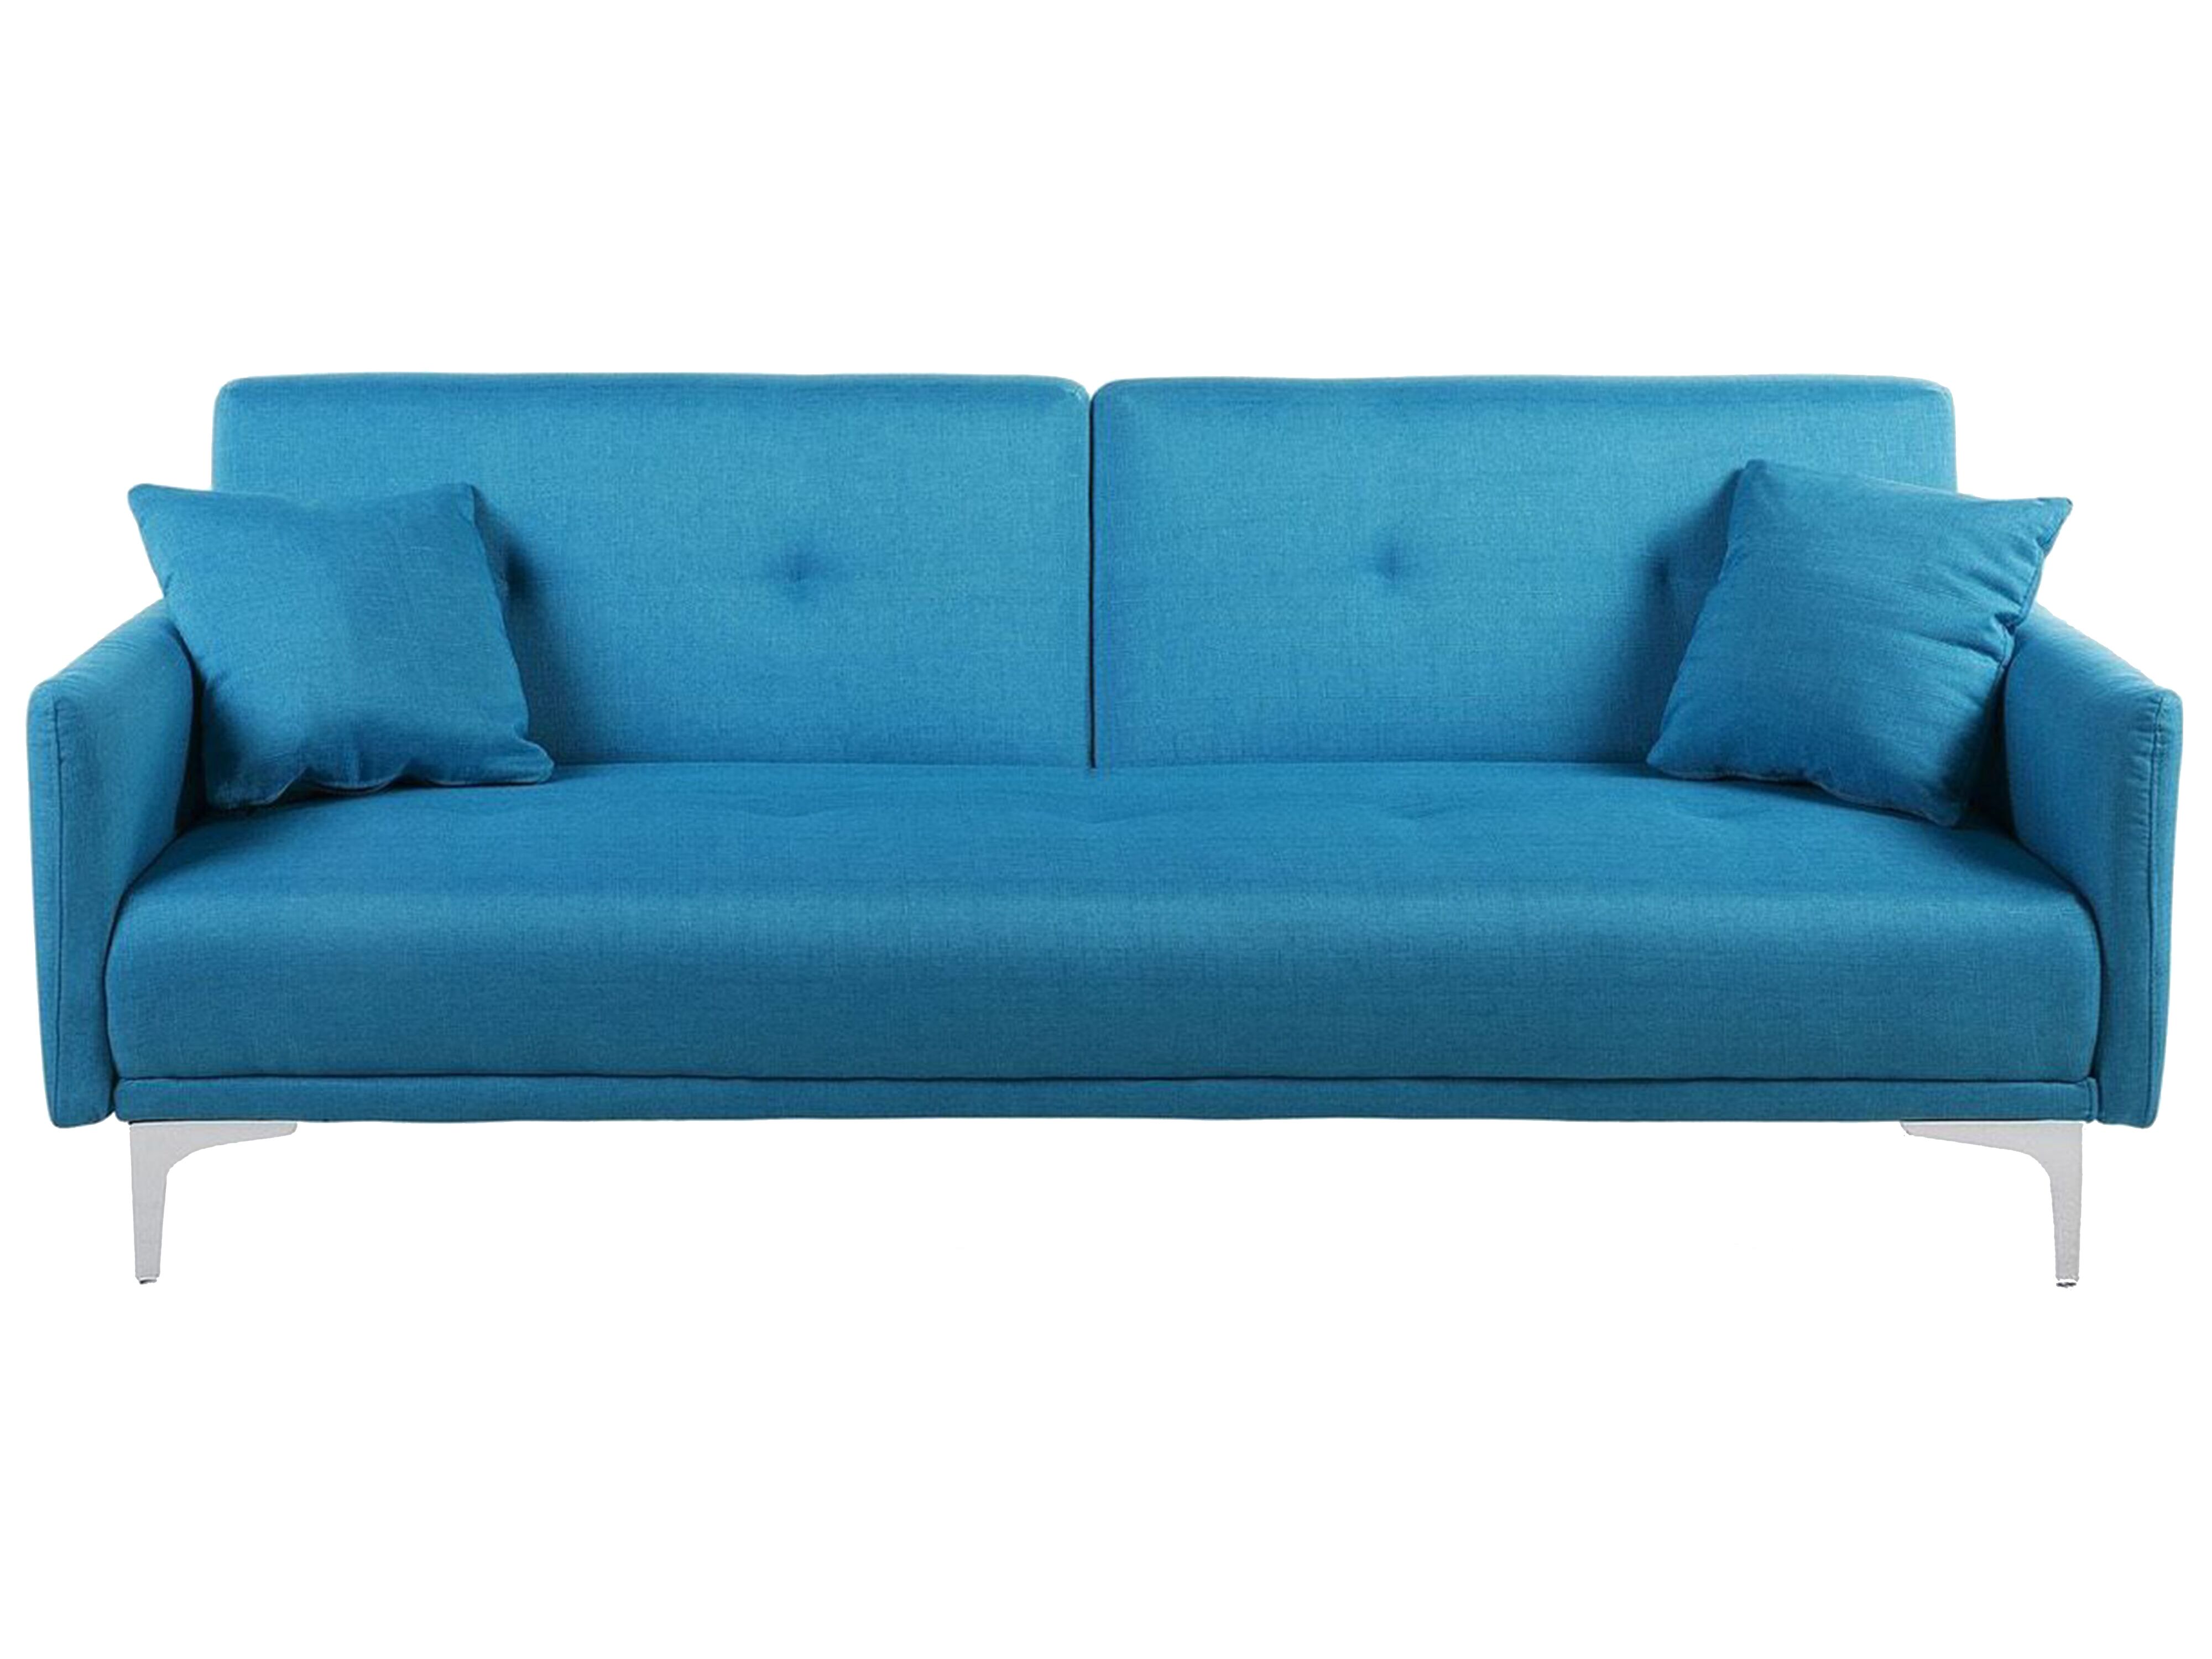 Fabric Sofa Bed Sea Blue LUCAN | ex Factury at Fair Price - Right to Return  within 100 days